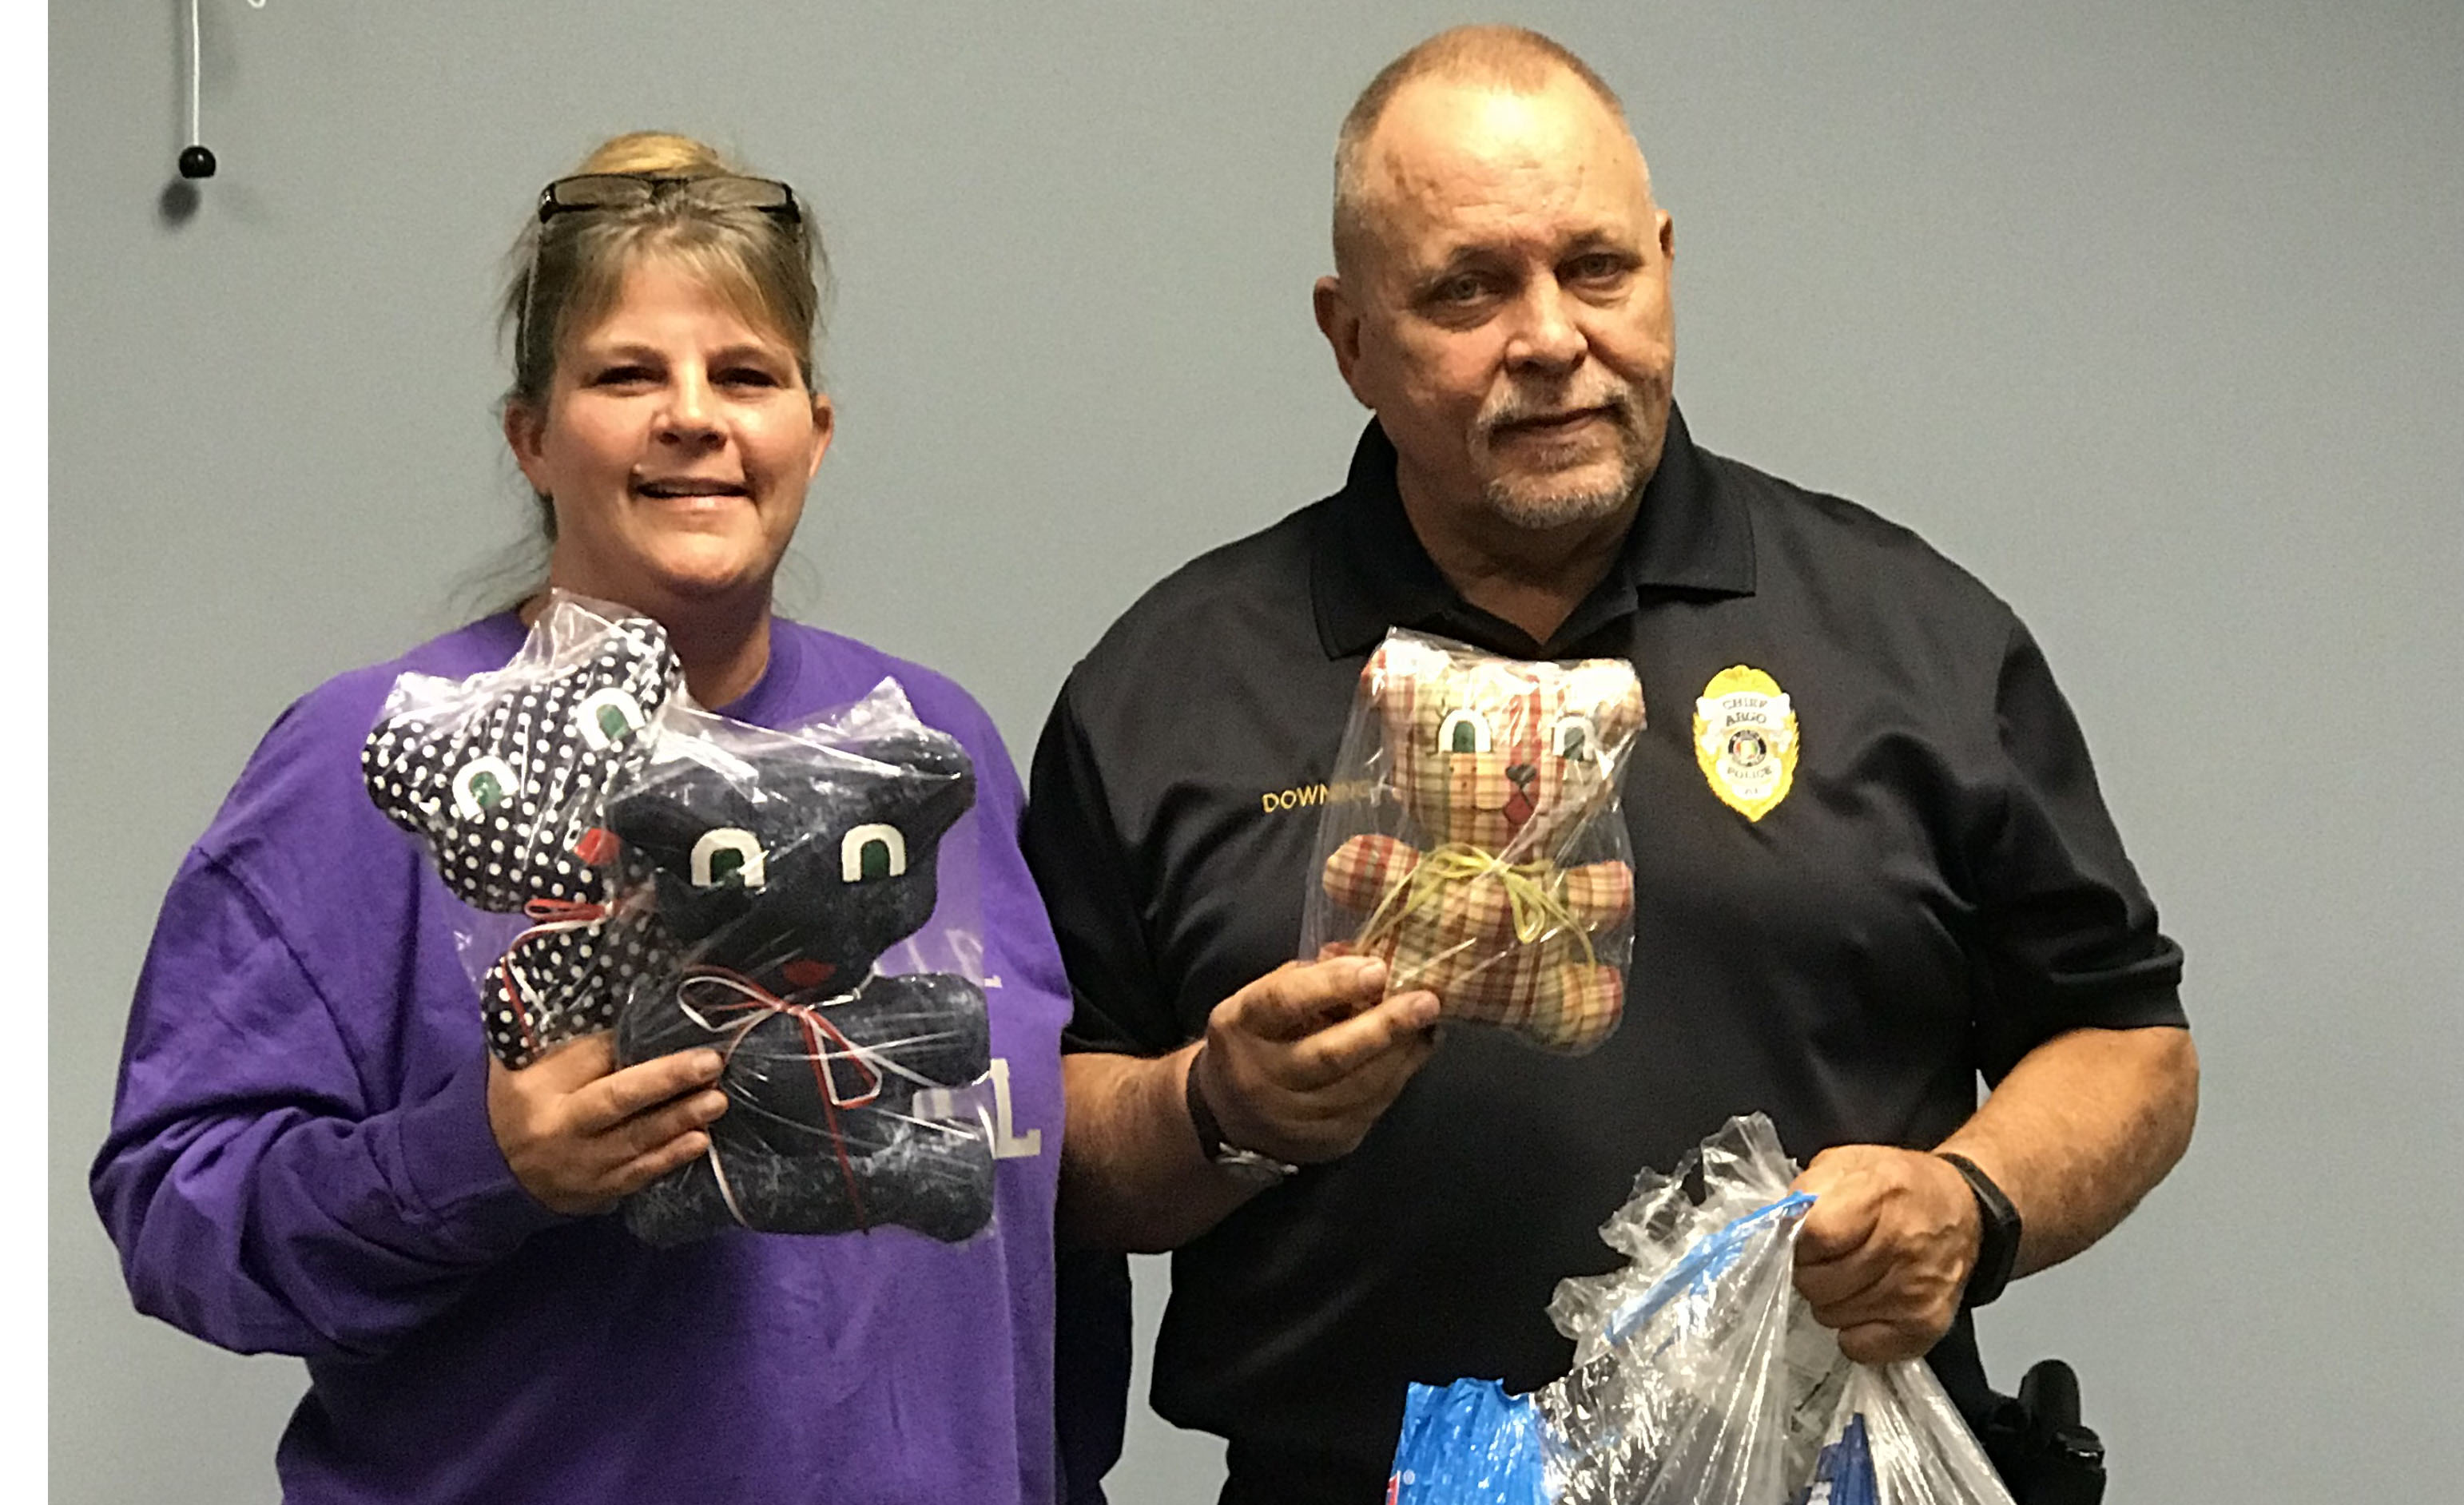 Argo police receive Hug-A-Bear toys to be used to assist with traumatized children